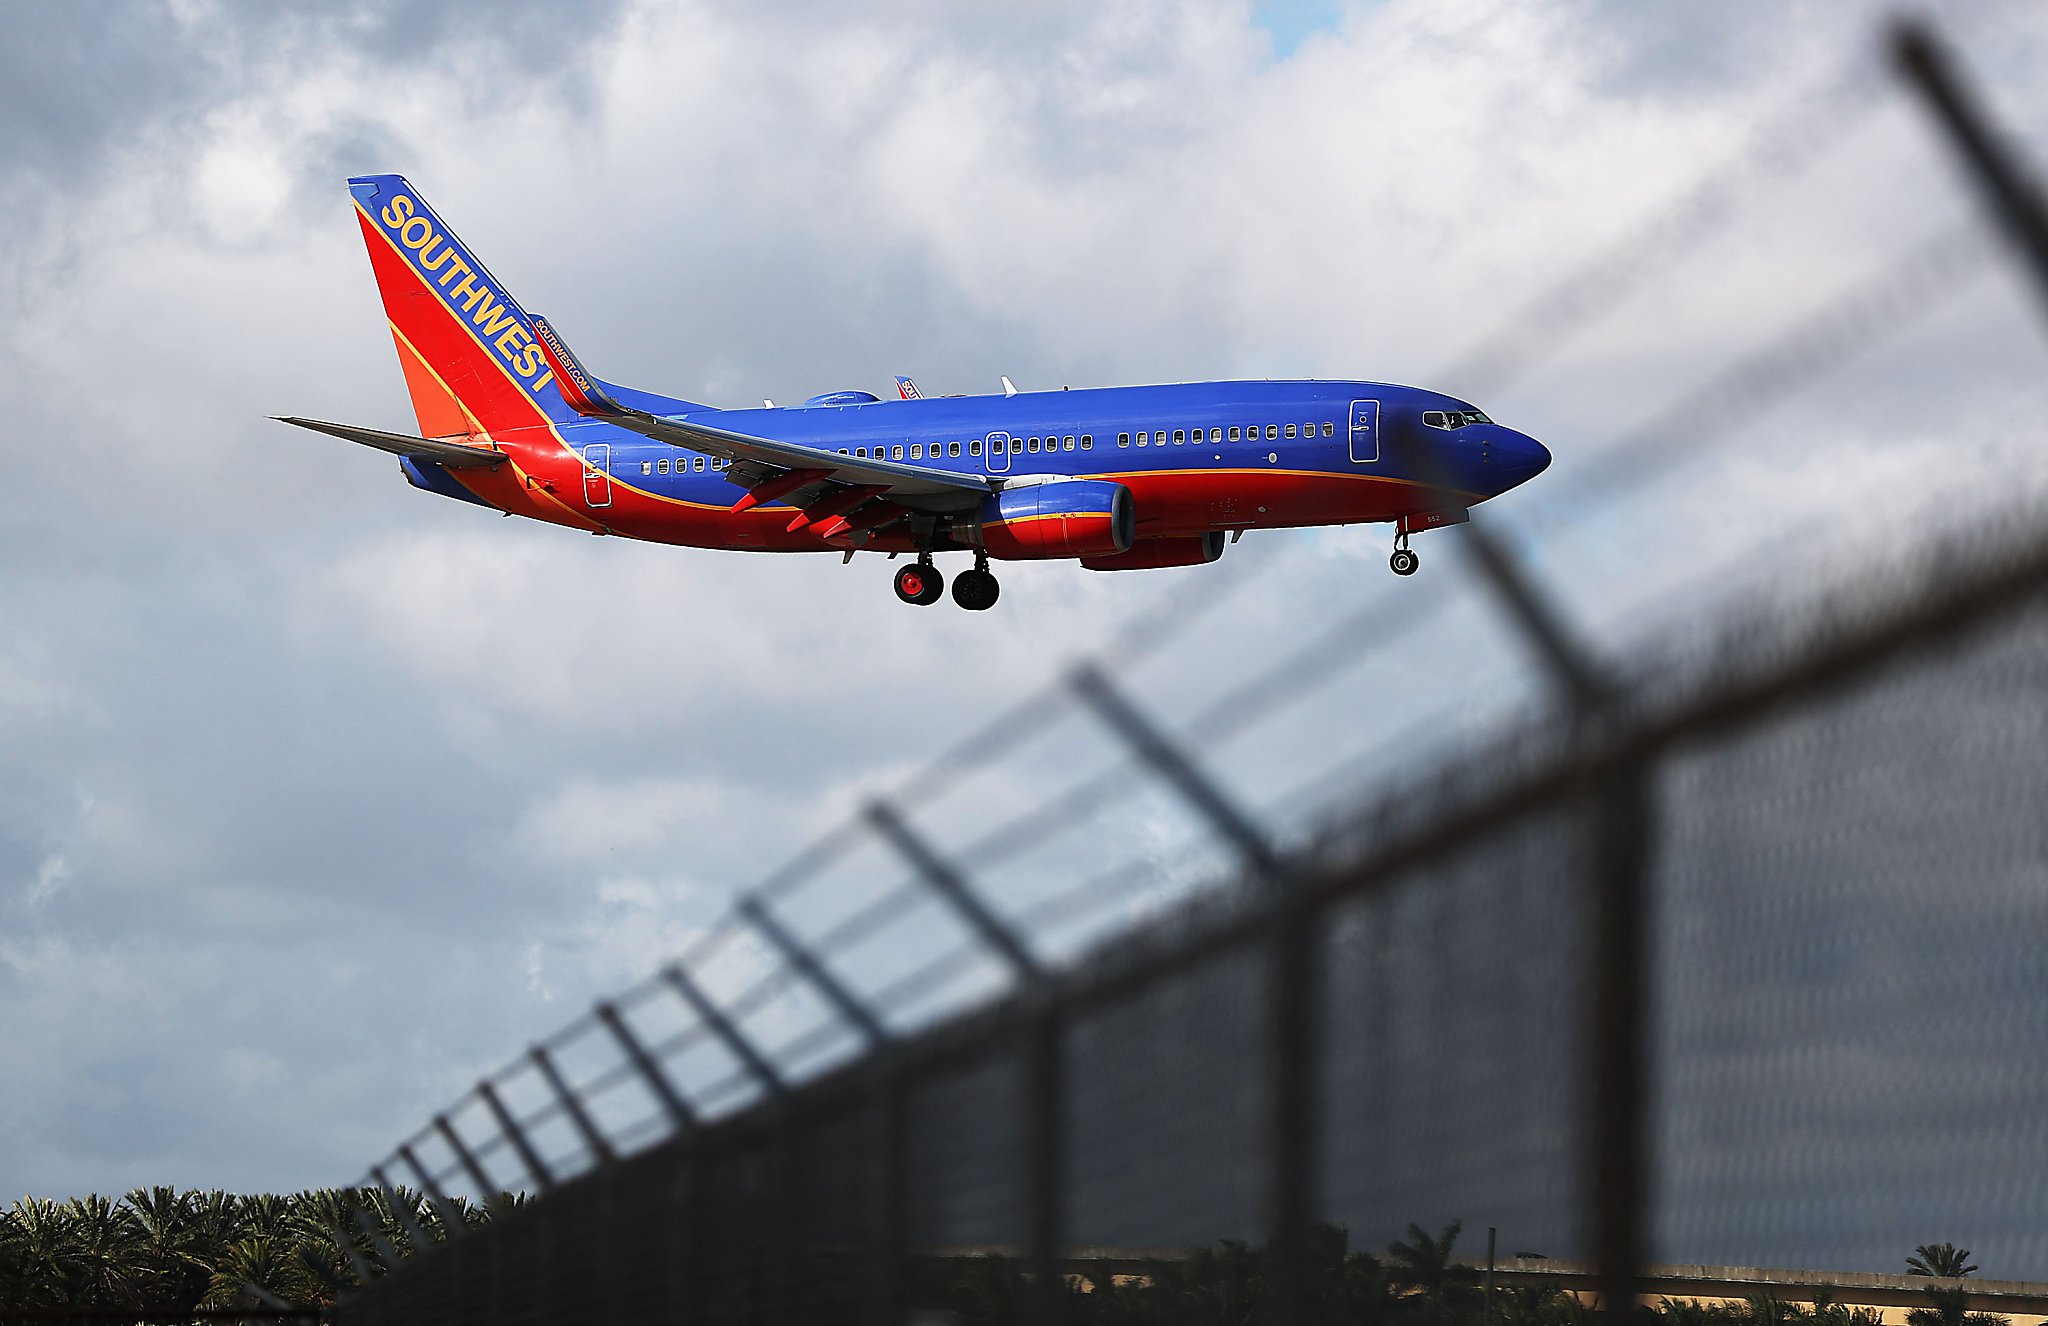 southwest airlines flights grounded